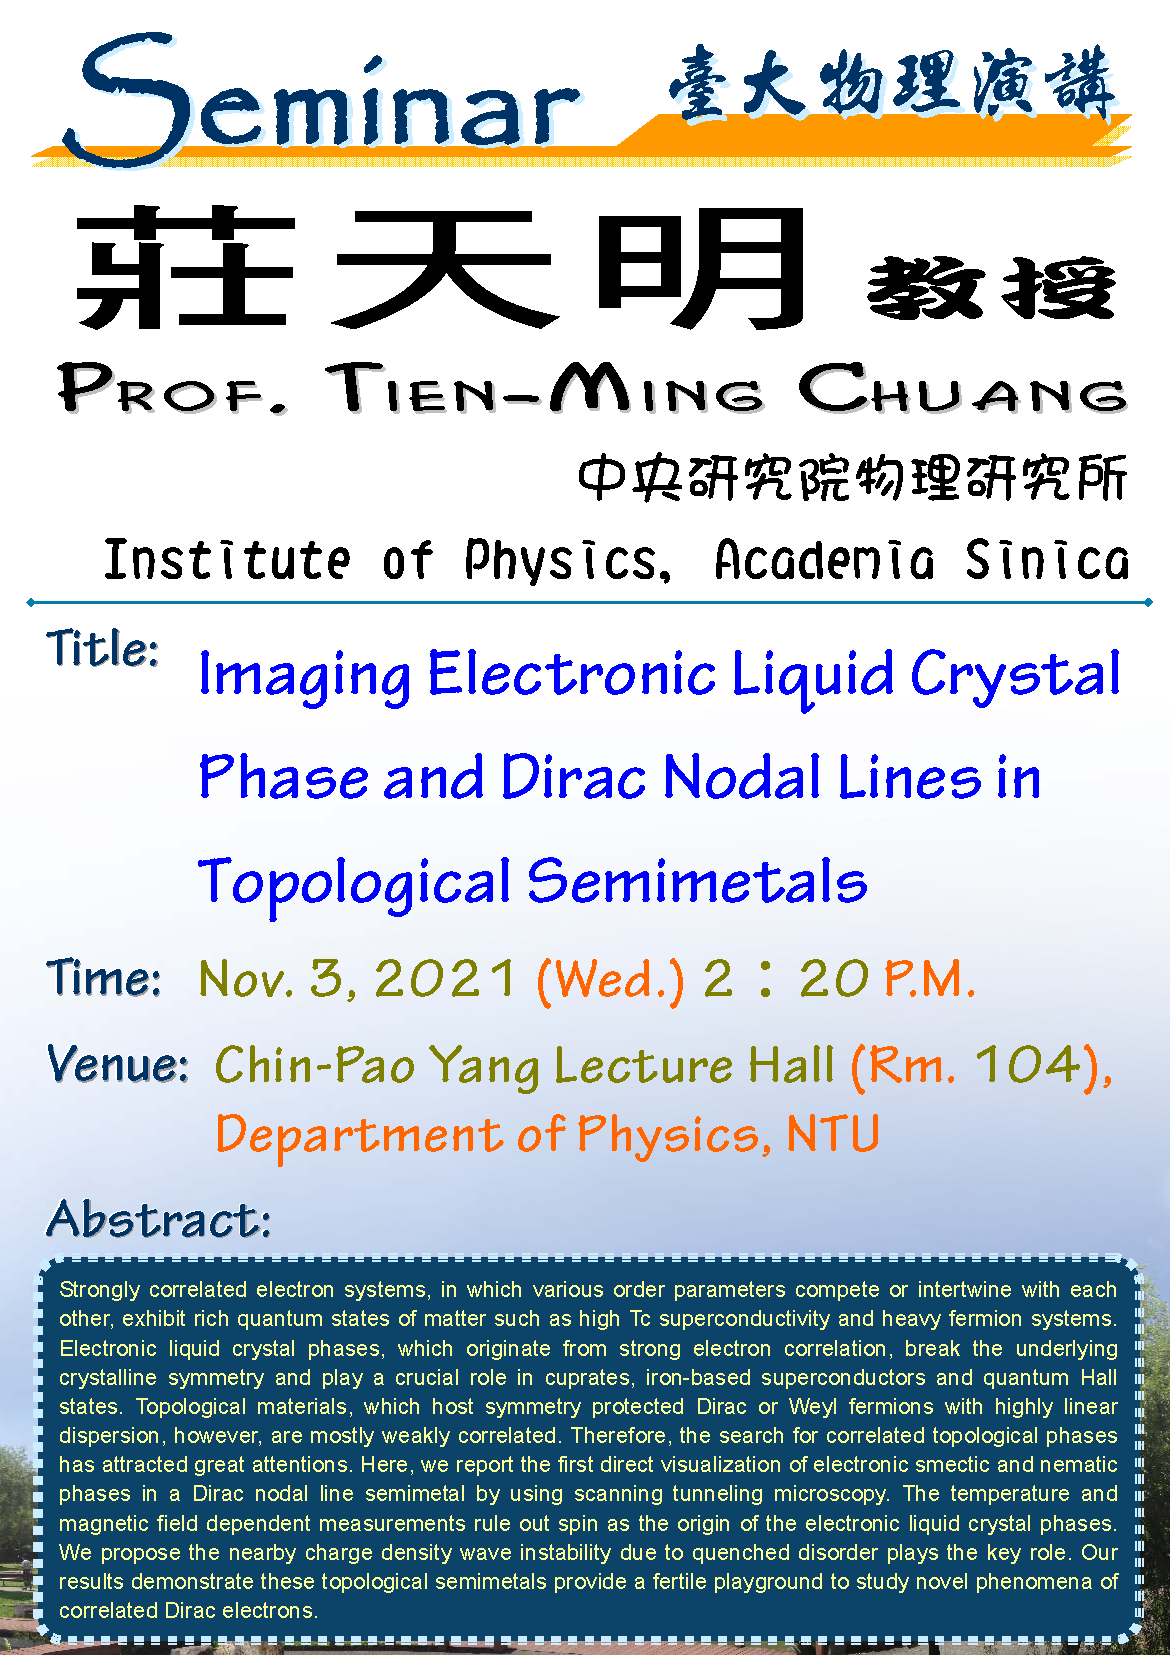 Imaging Electronic Liquid Crystal Phase and Dirac Nodal Lines in Topological Semimetals